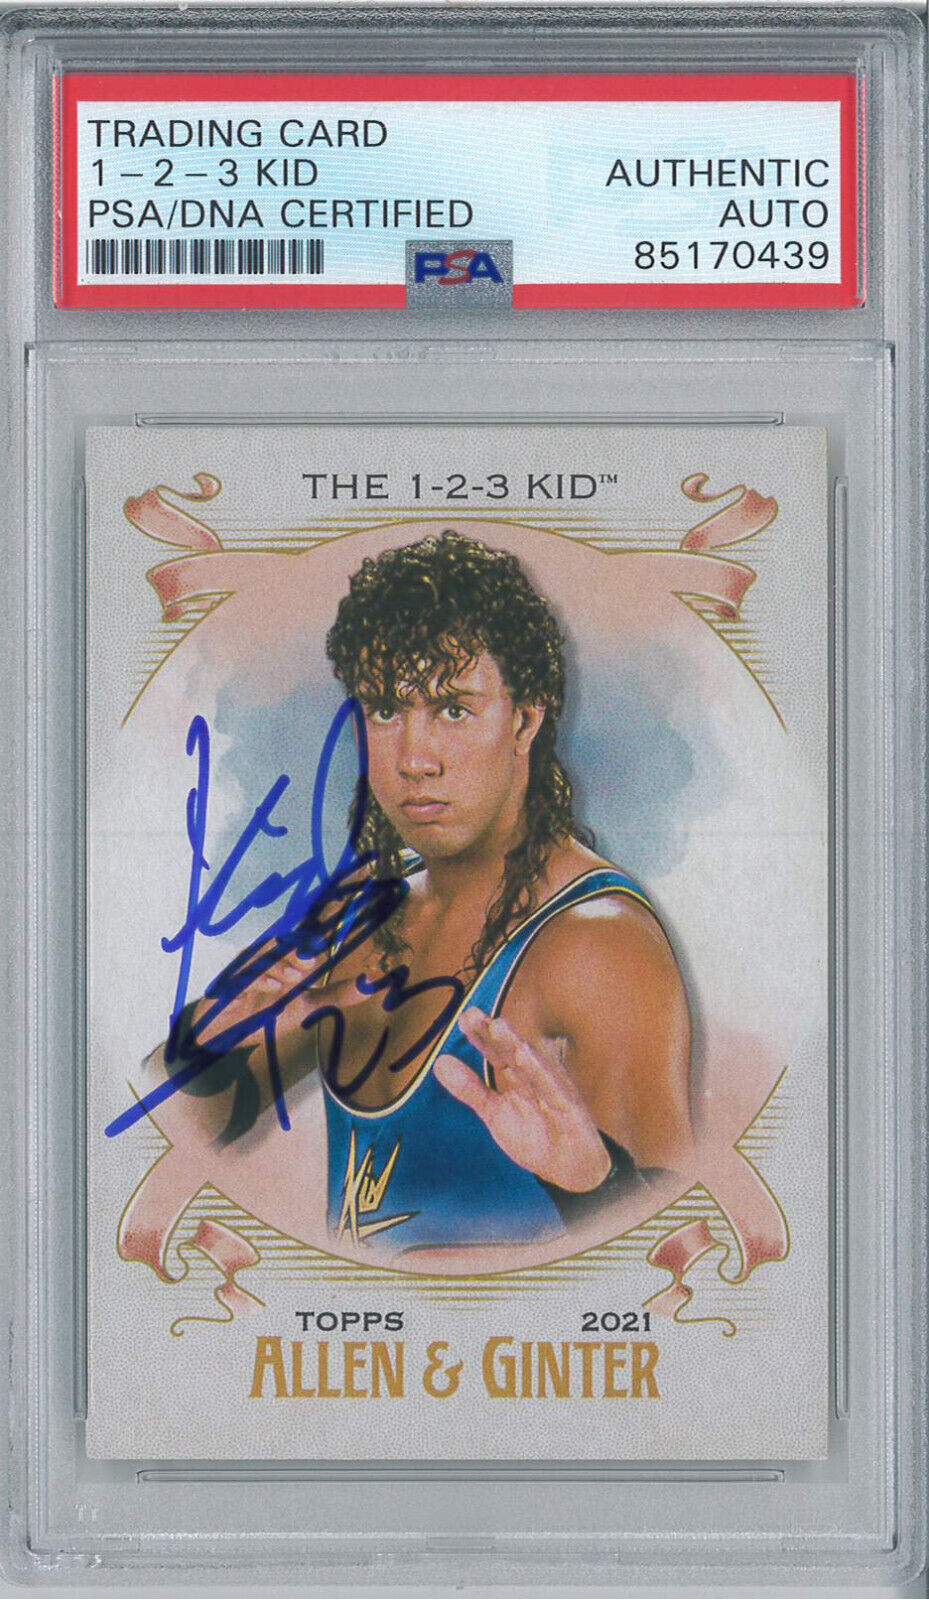 The 1 2 3 Kid Signed Autograph Slabbed 2021 Topps Allen & Ginter Card PSA DNA